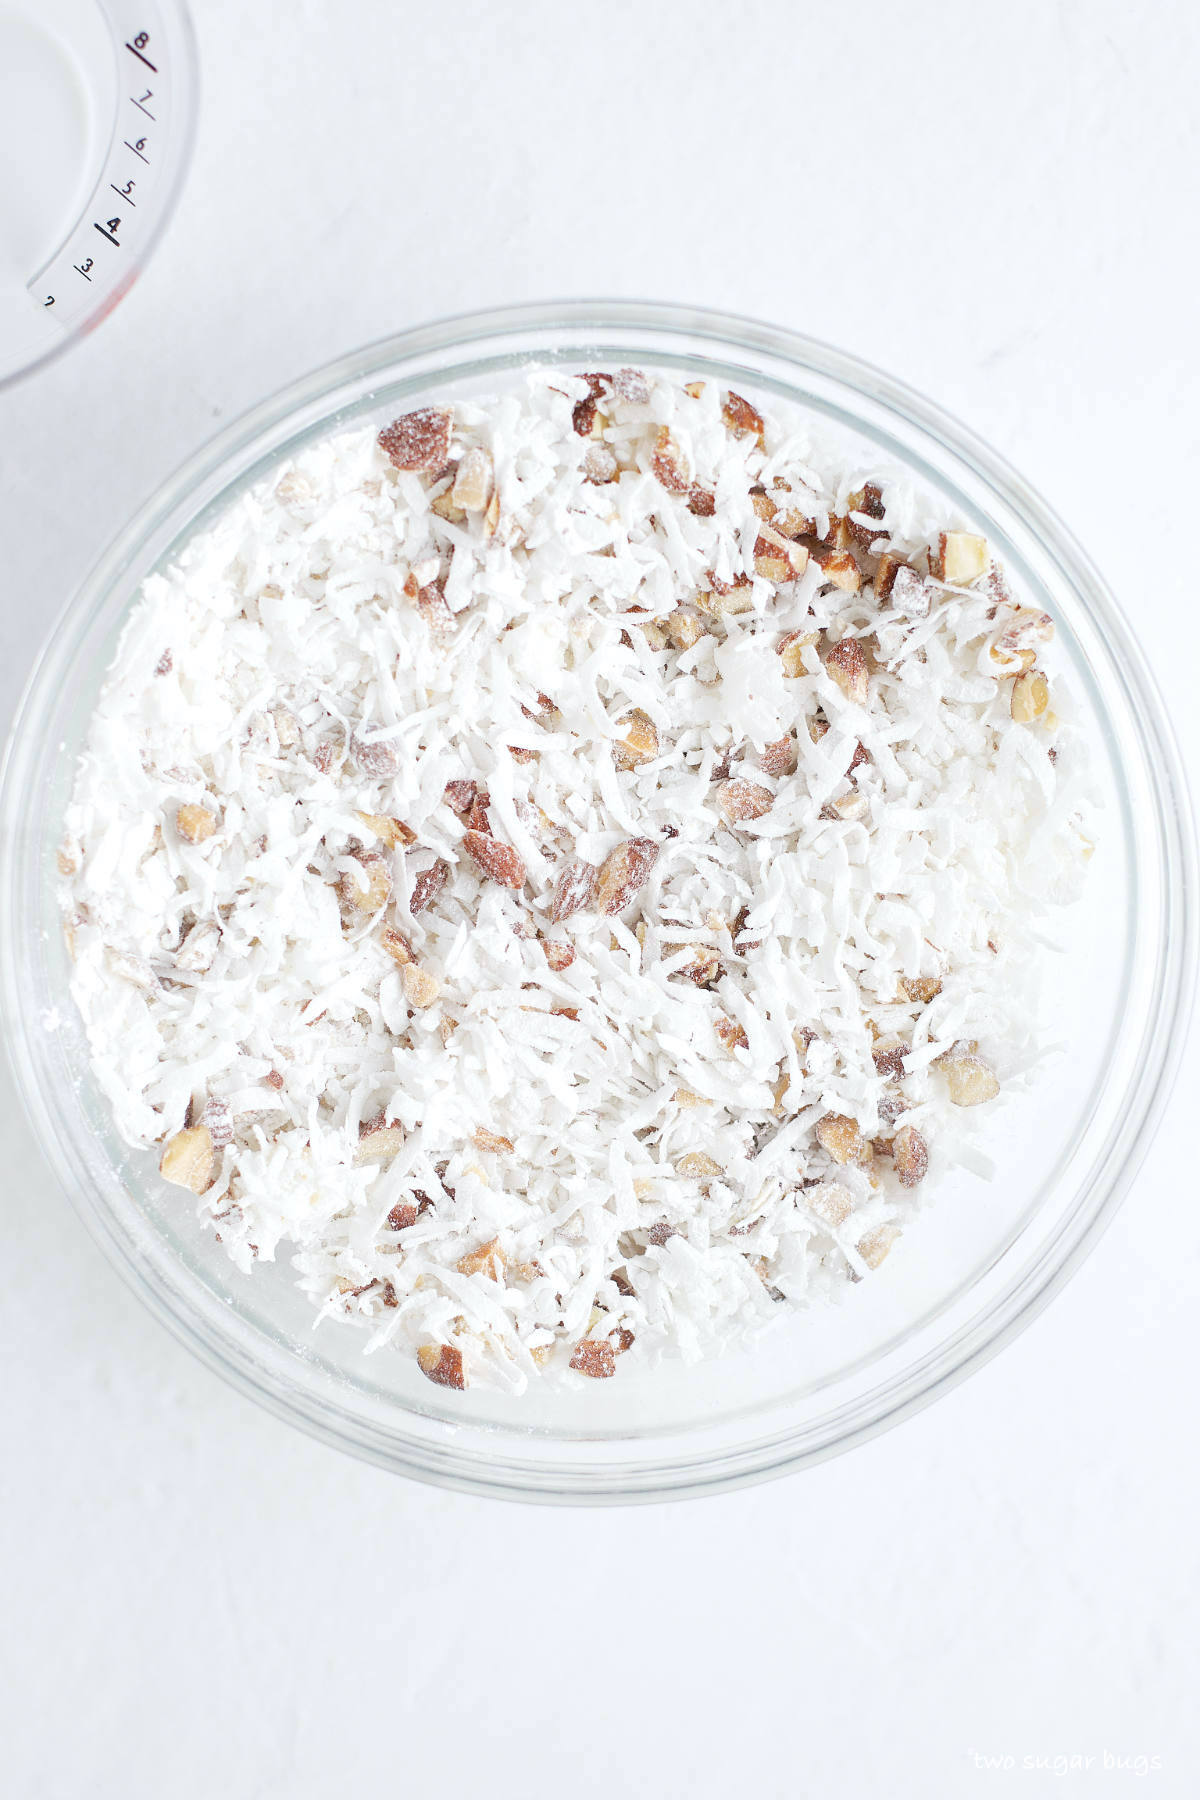 shredded coconut, almonds and confectioners' sugar mixed in a bowl